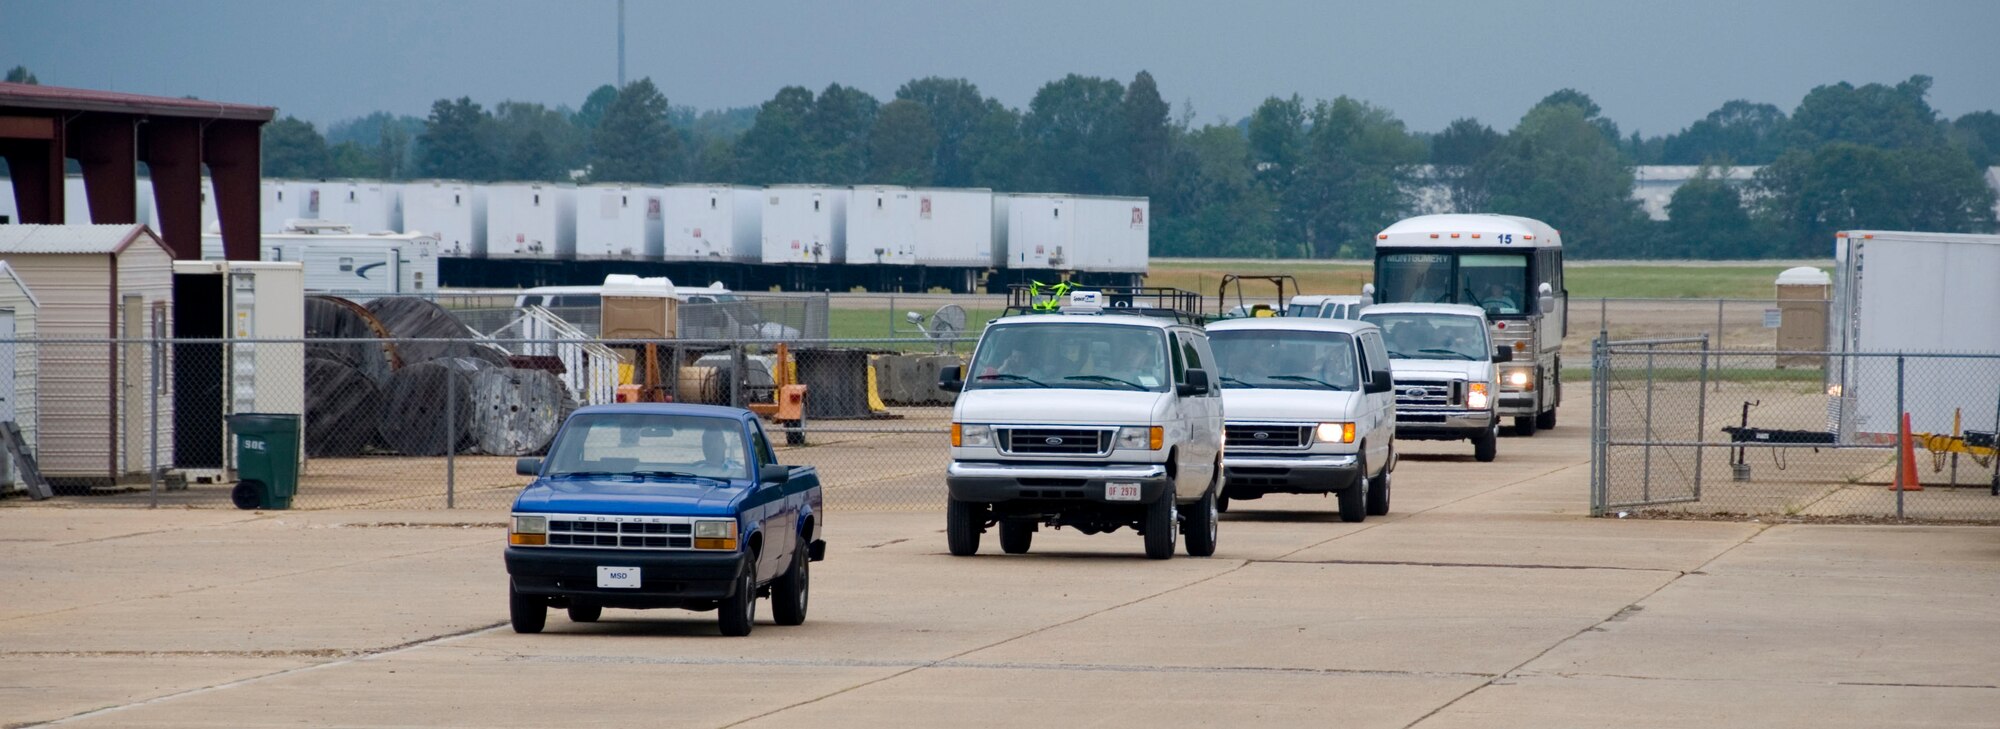 Members of Ohio Task Force-1 roll onto Maxwell Air Force Base on Sept. 8 in support of the Federal Emergency Management Agency's hurricane relief efforts. (Air Force photo by Jamie Pitcher)